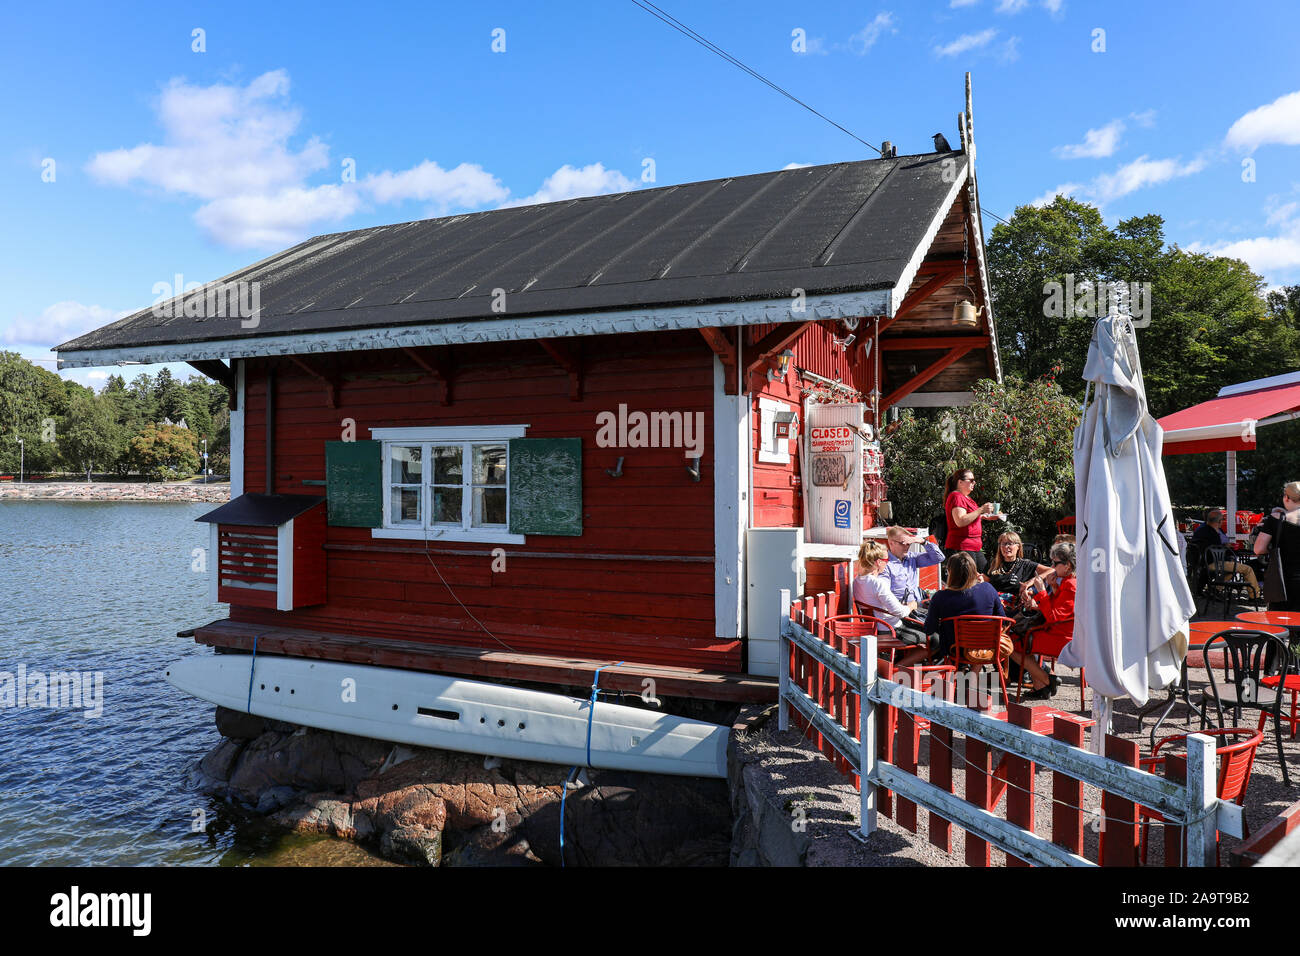 Cafe Regatta, small outdoor café by the sea, operating from 120 years old log cabin in Helsinki, Finland Stock Photo